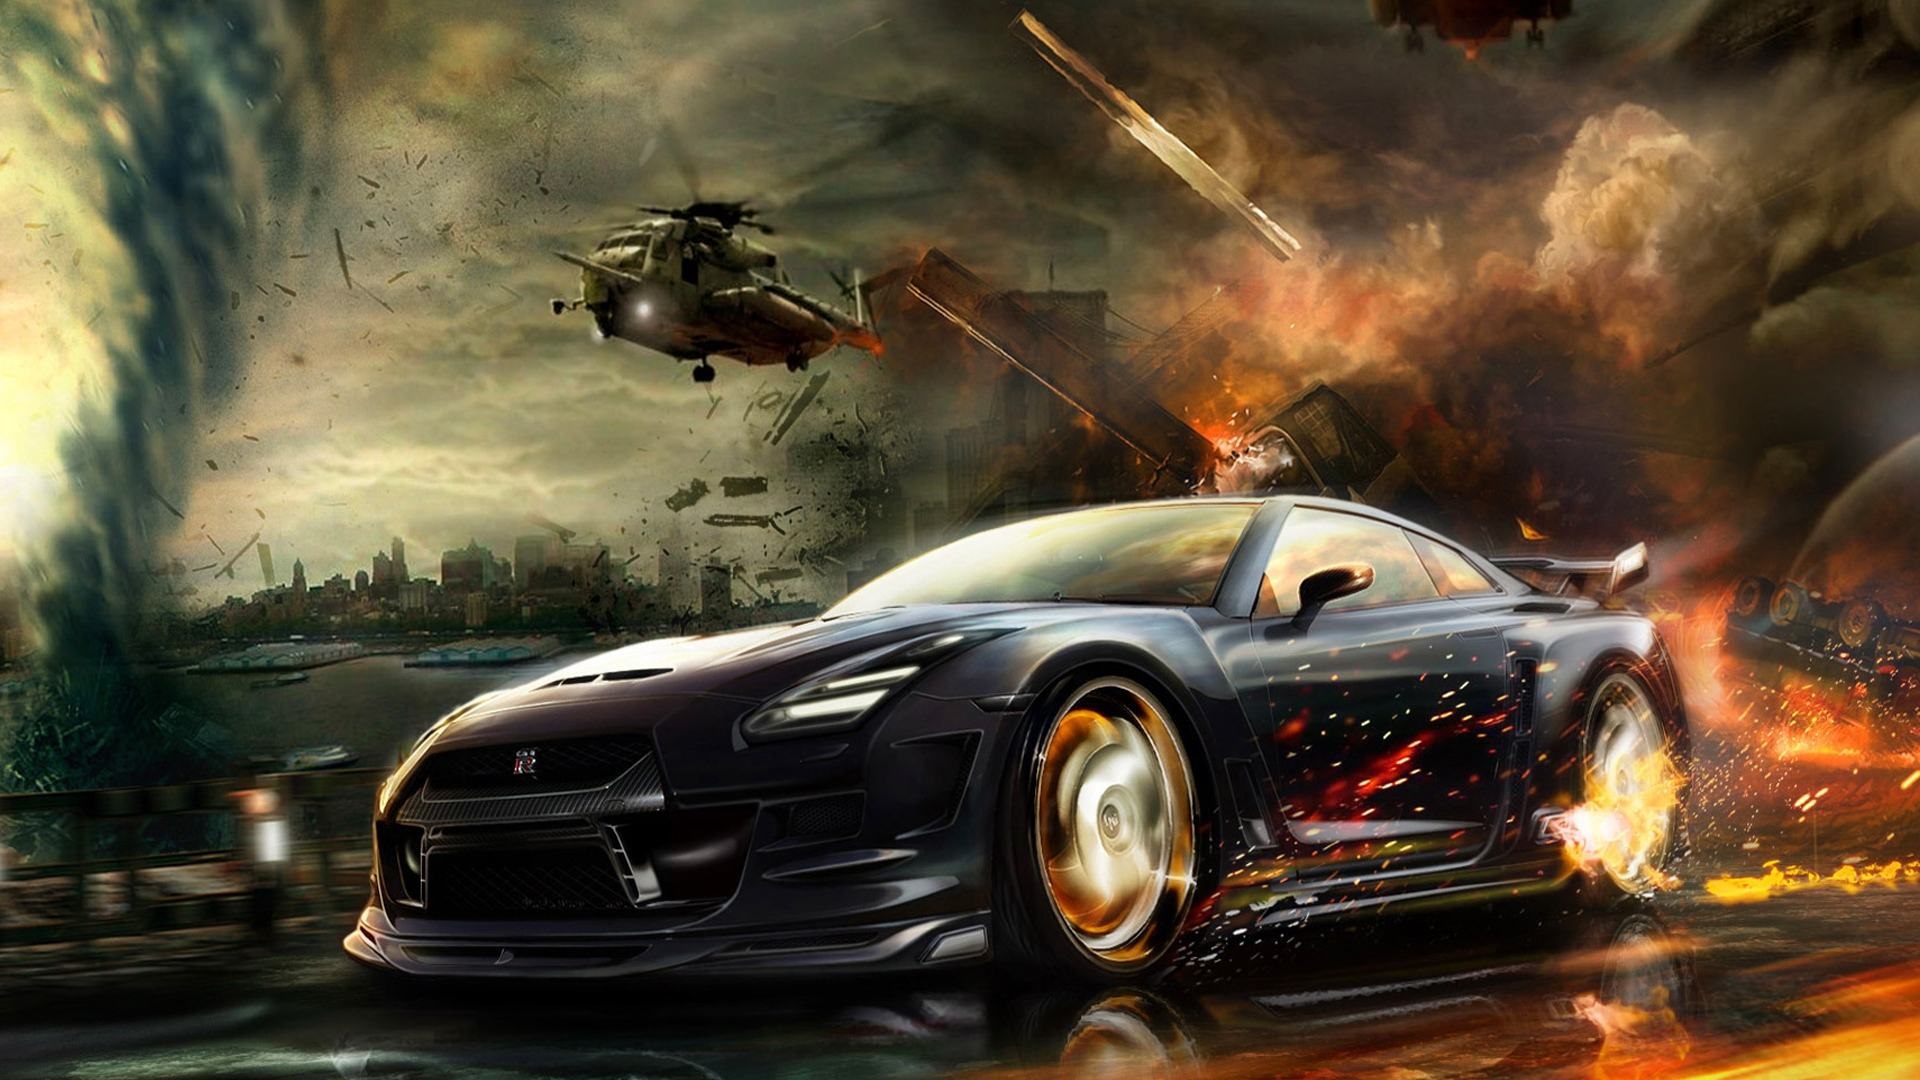 Wallpaper Need For Speed Rivals Chase Speed Helicopter - Need For Speed Rivals Wallpaper 1080p - HD Wallpaper 